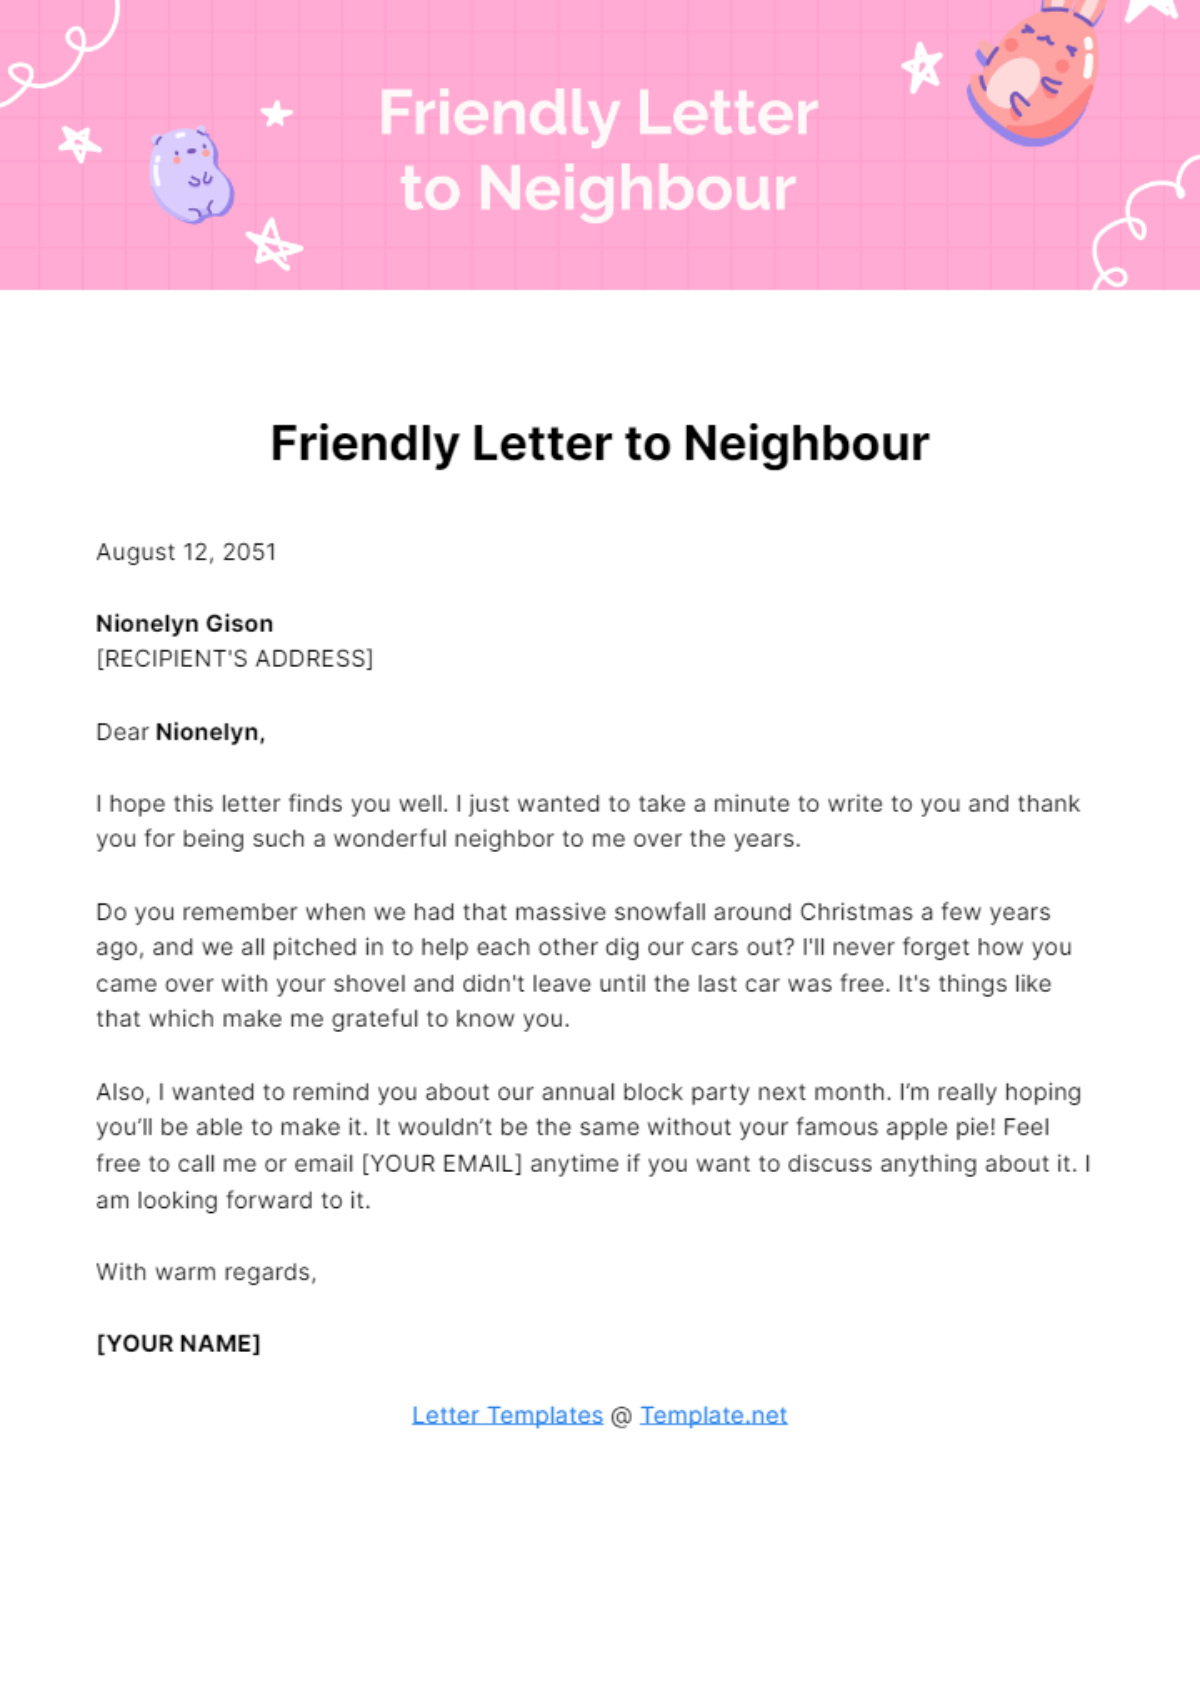 Friendly Letter to Neighbor Template